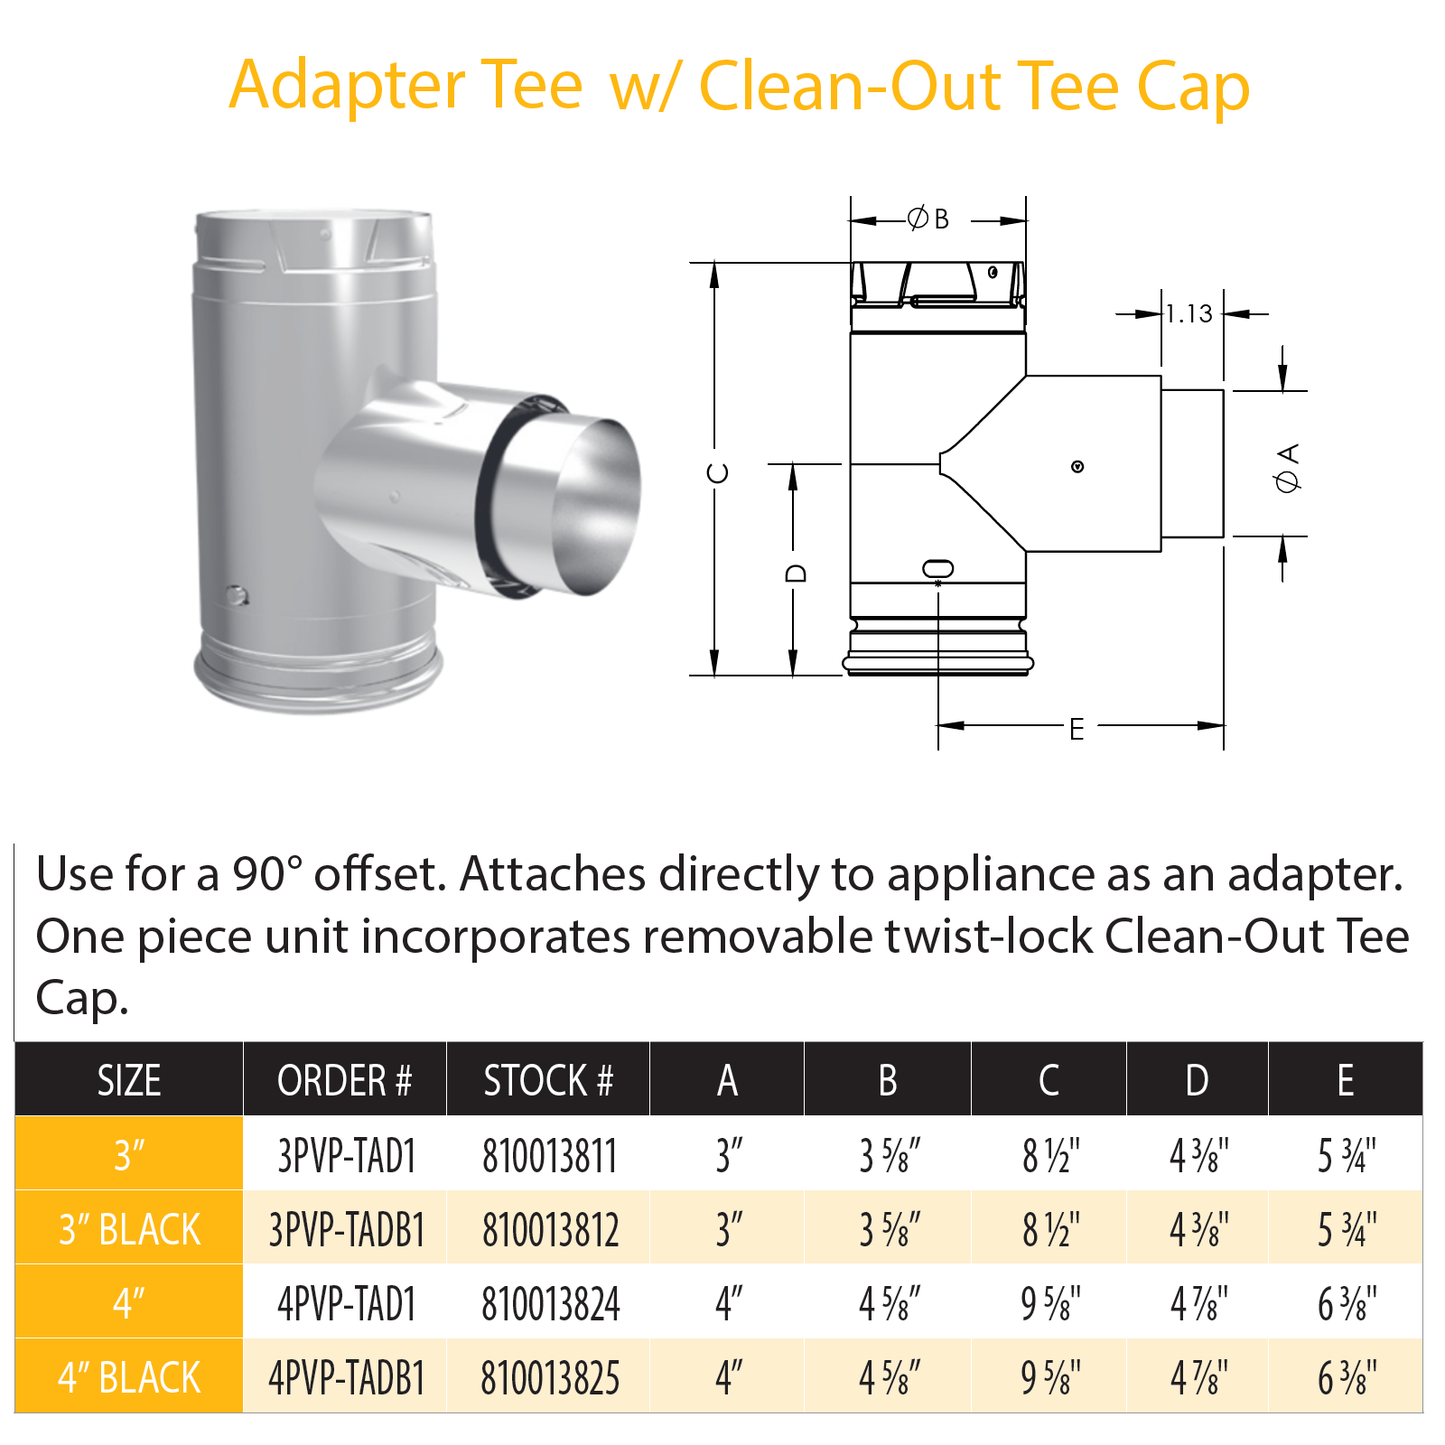 DuraVent Pellet Vent Pro Adapter Tee w/Clean-Out Tee Cap | 3PVP-TAD1